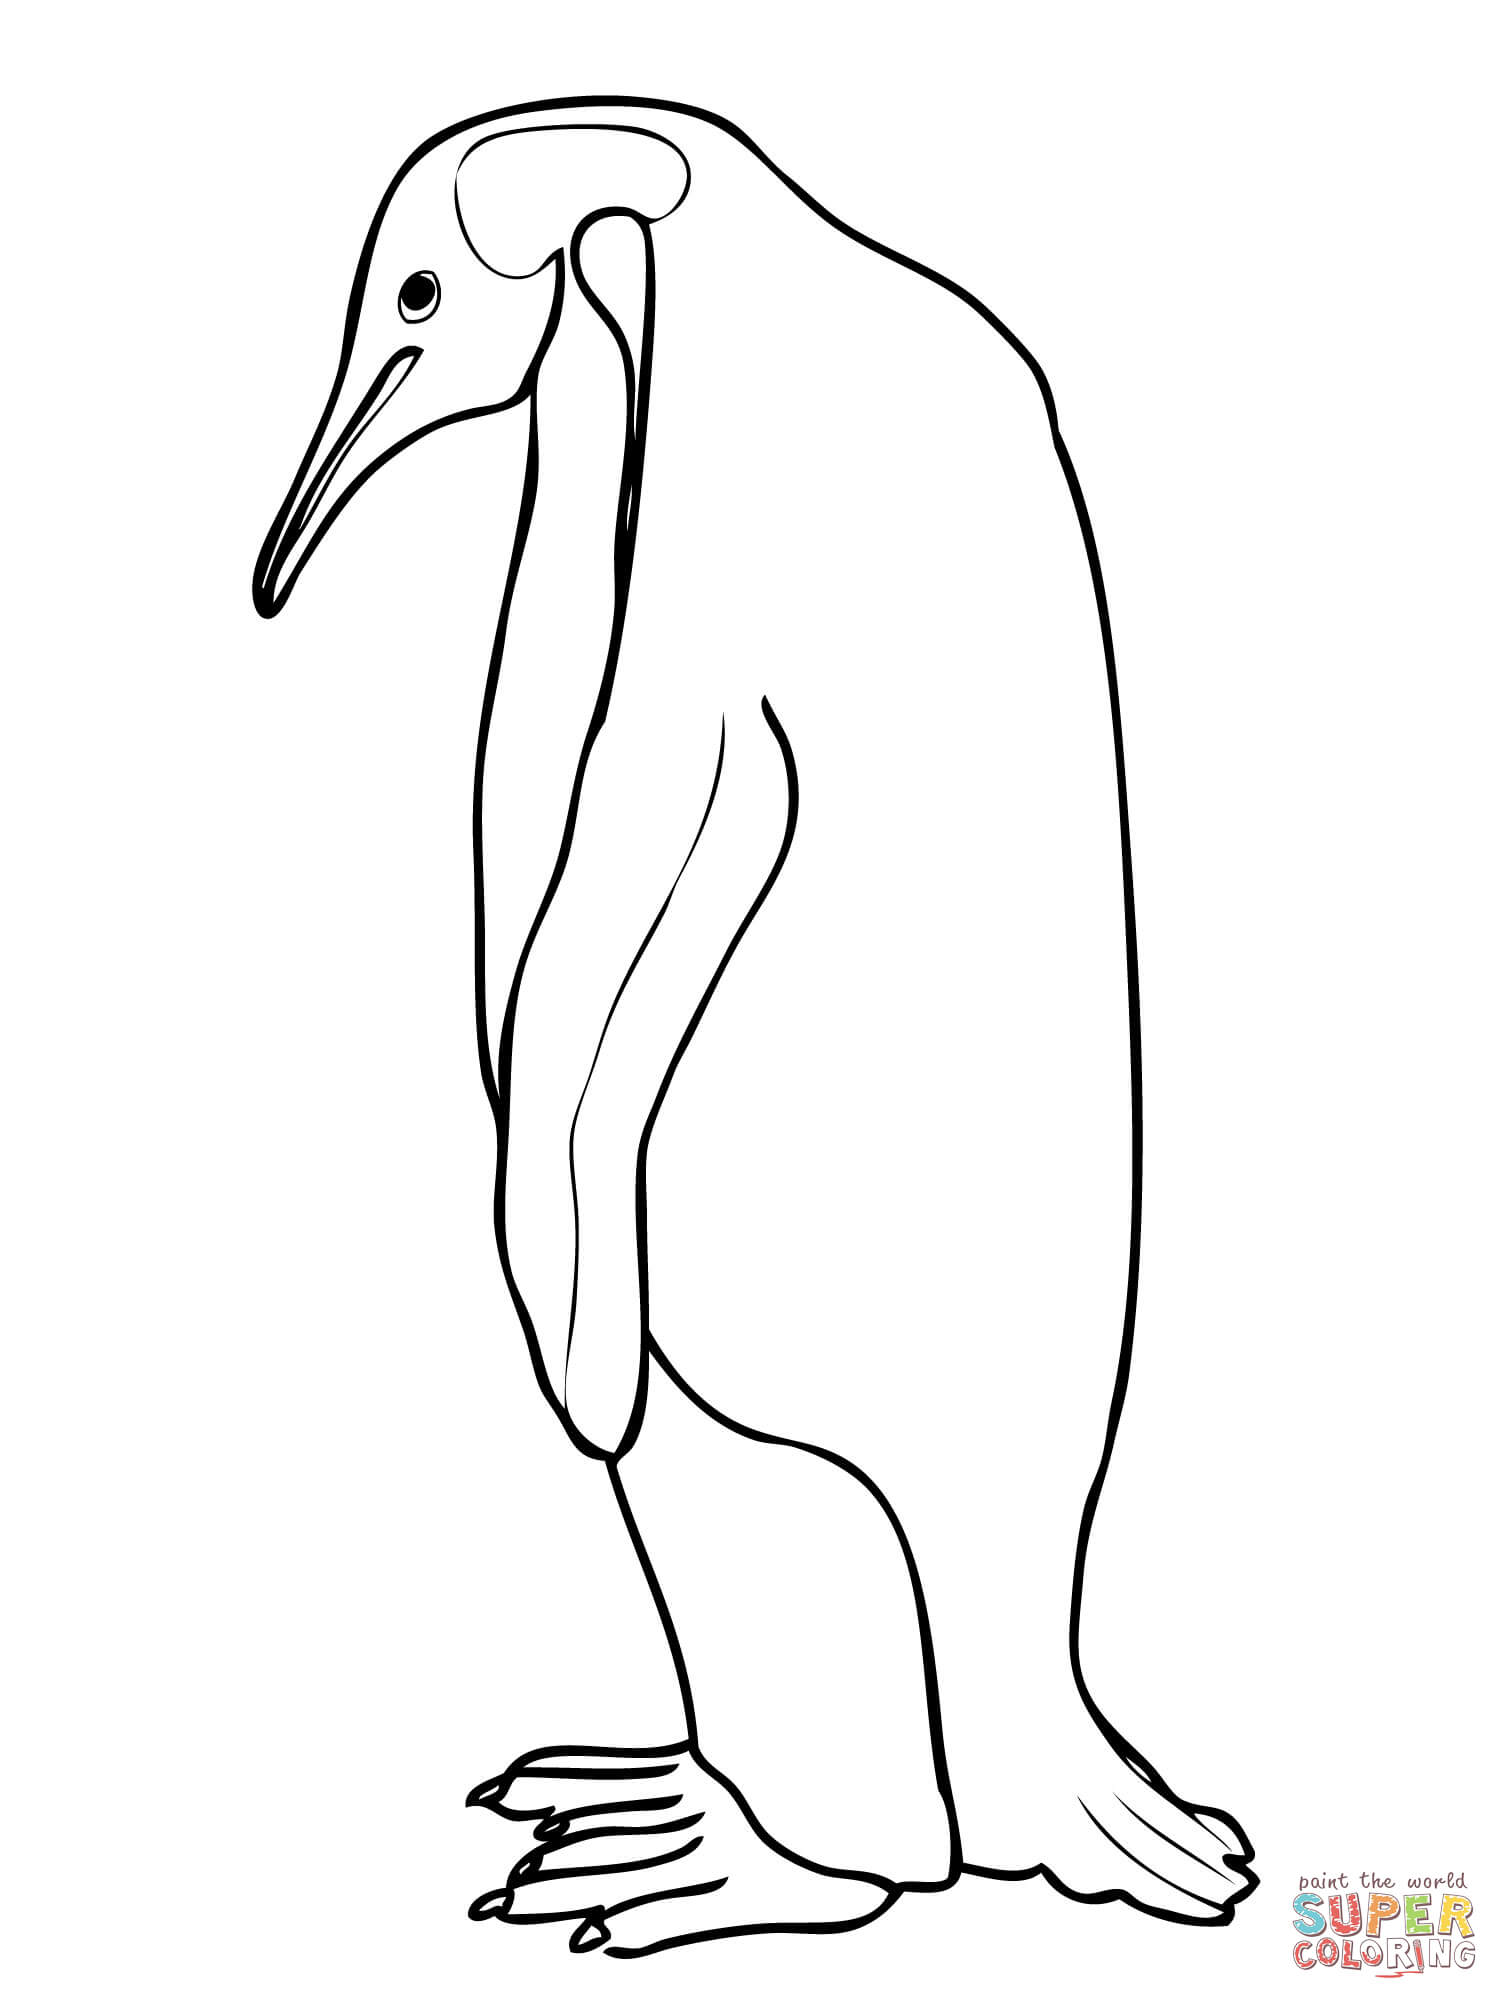 Emperor Penguin coloring page | Free Printable Coloring Pages